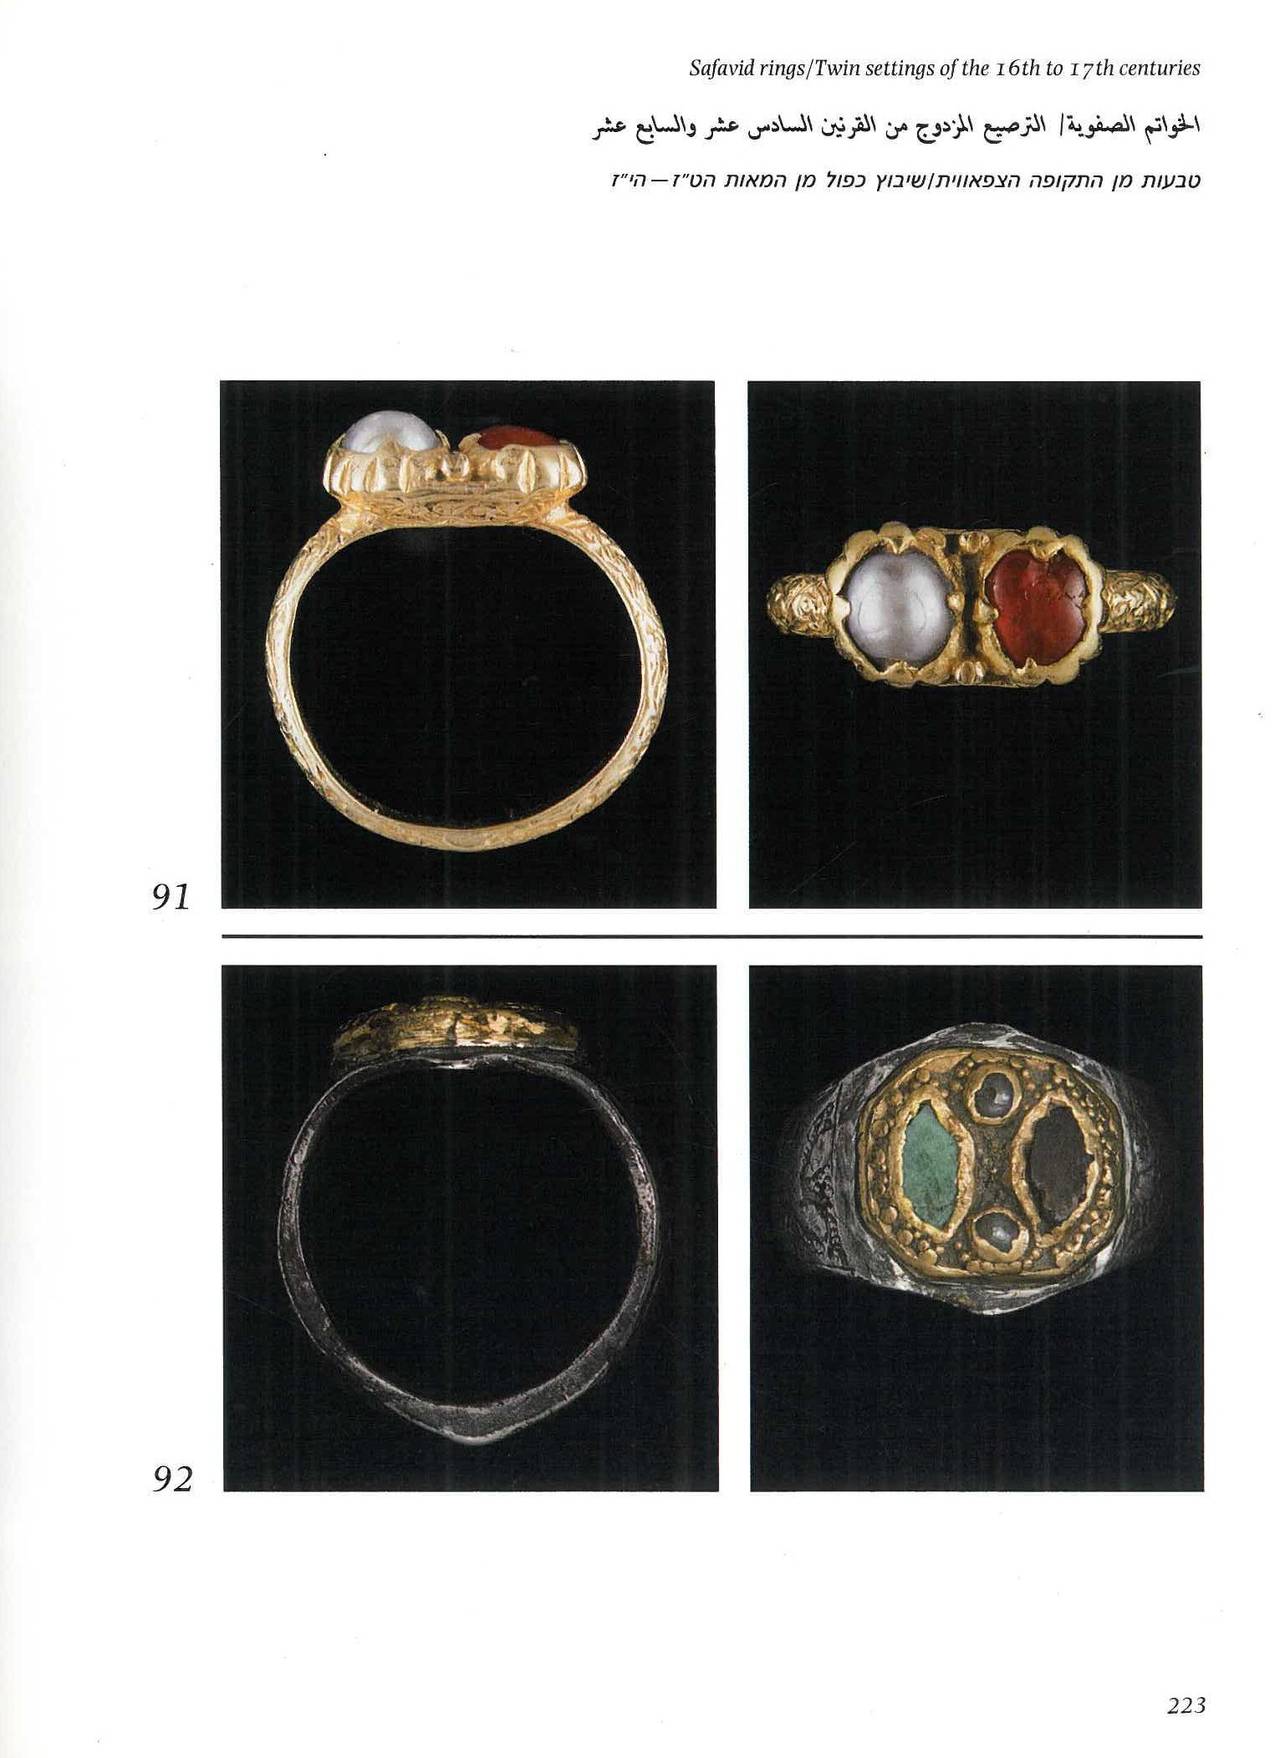 Book of Islamic Rings & Gems - The Zucker Collection 1